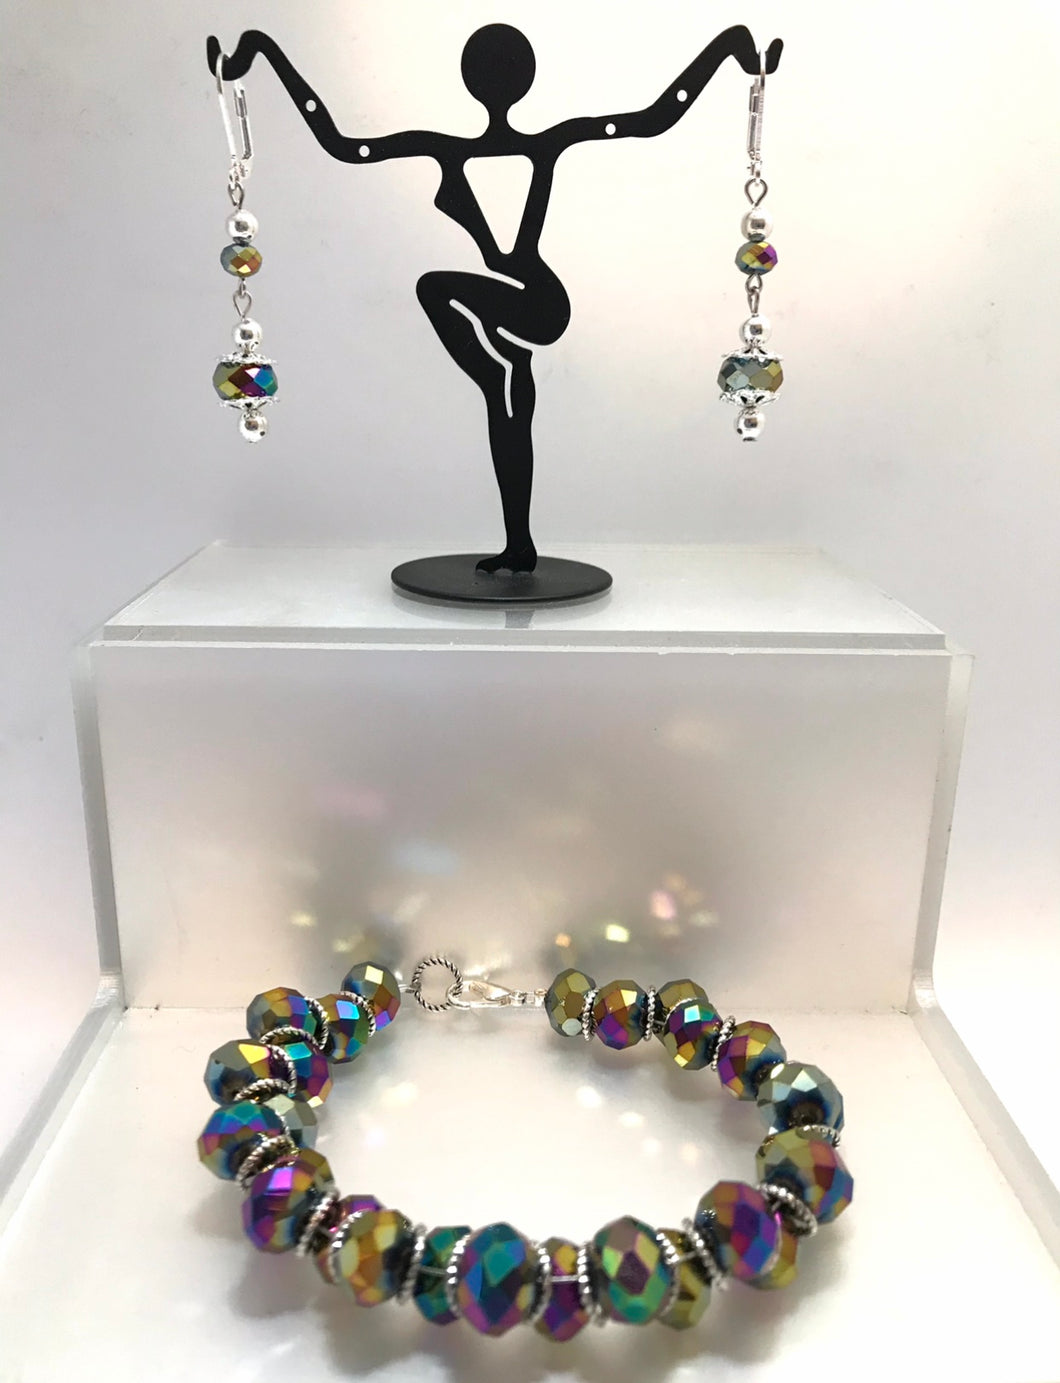 Irridescent multi-color glass bead bracelet and dangling earring set